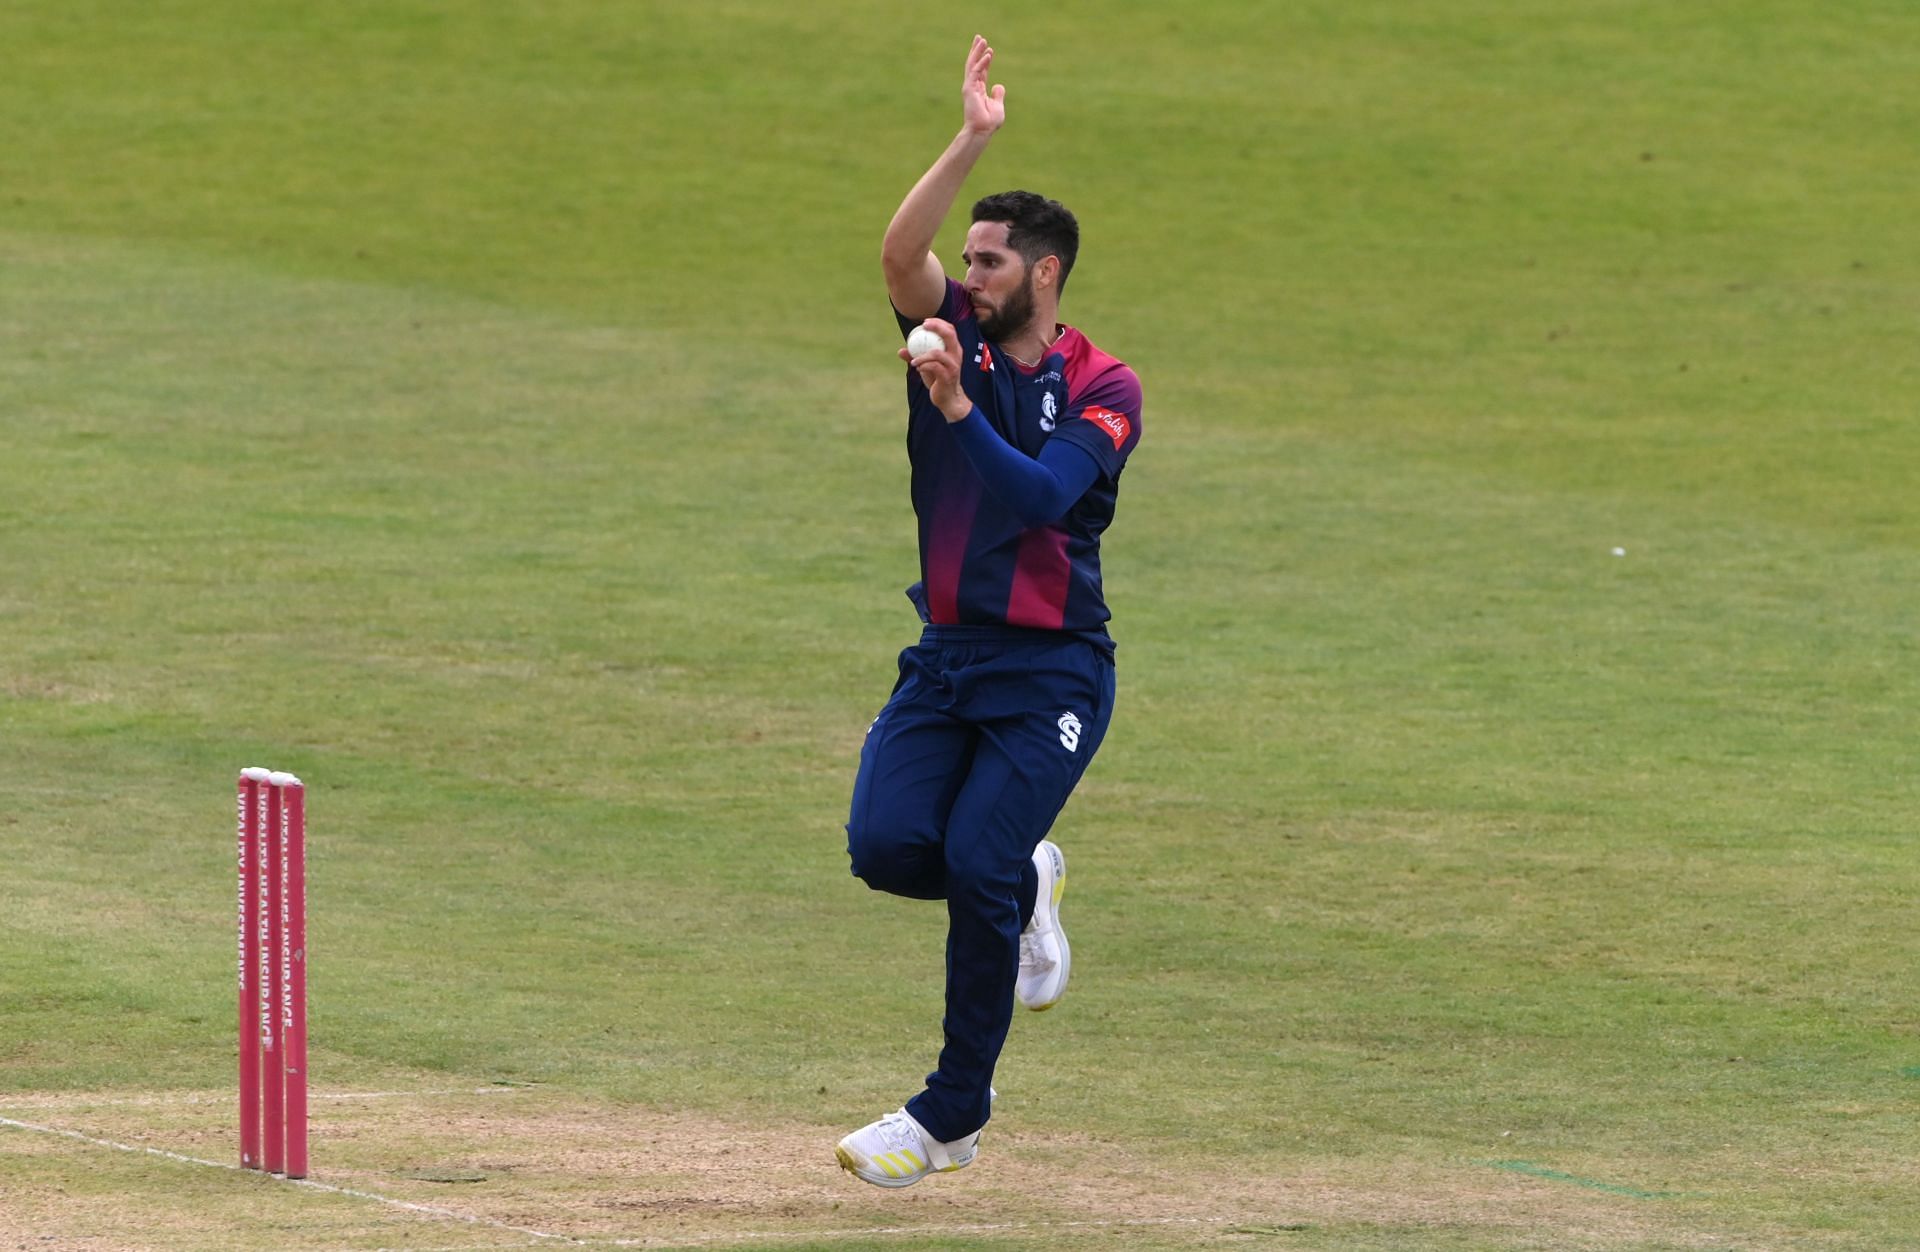 Wayne Parnell will be leading Western Province in the CSA T20 Challenge 2022